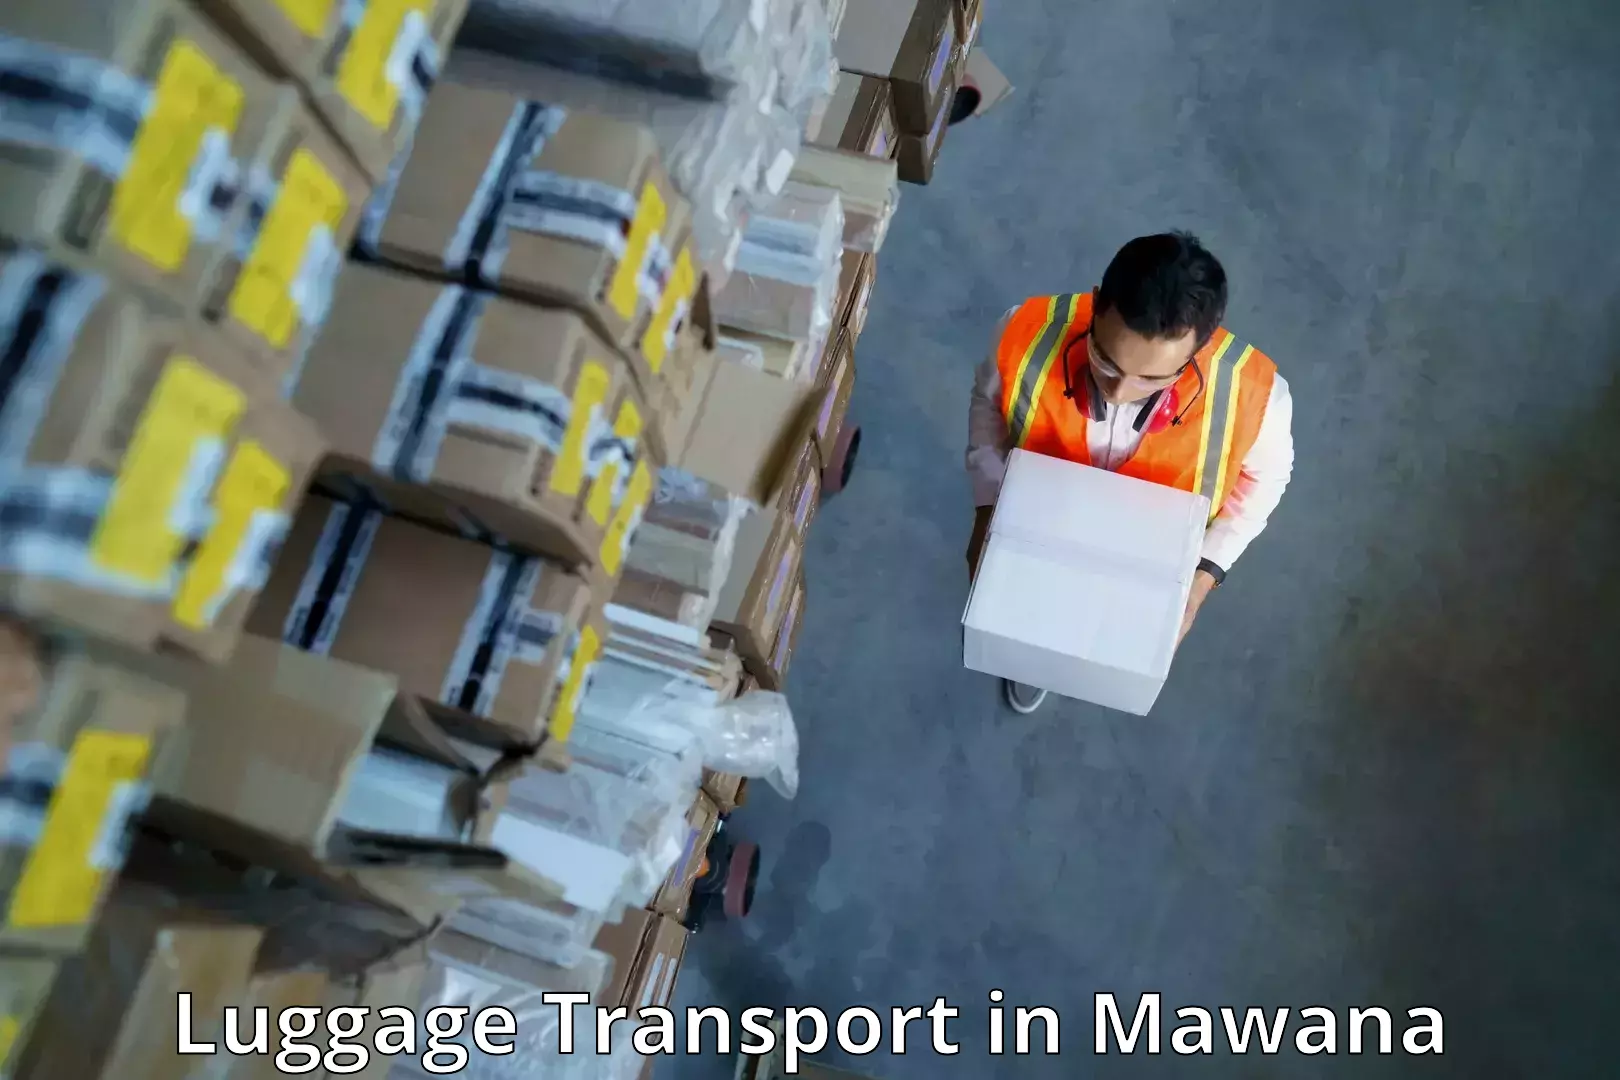 Baggage transport technology in Mawana